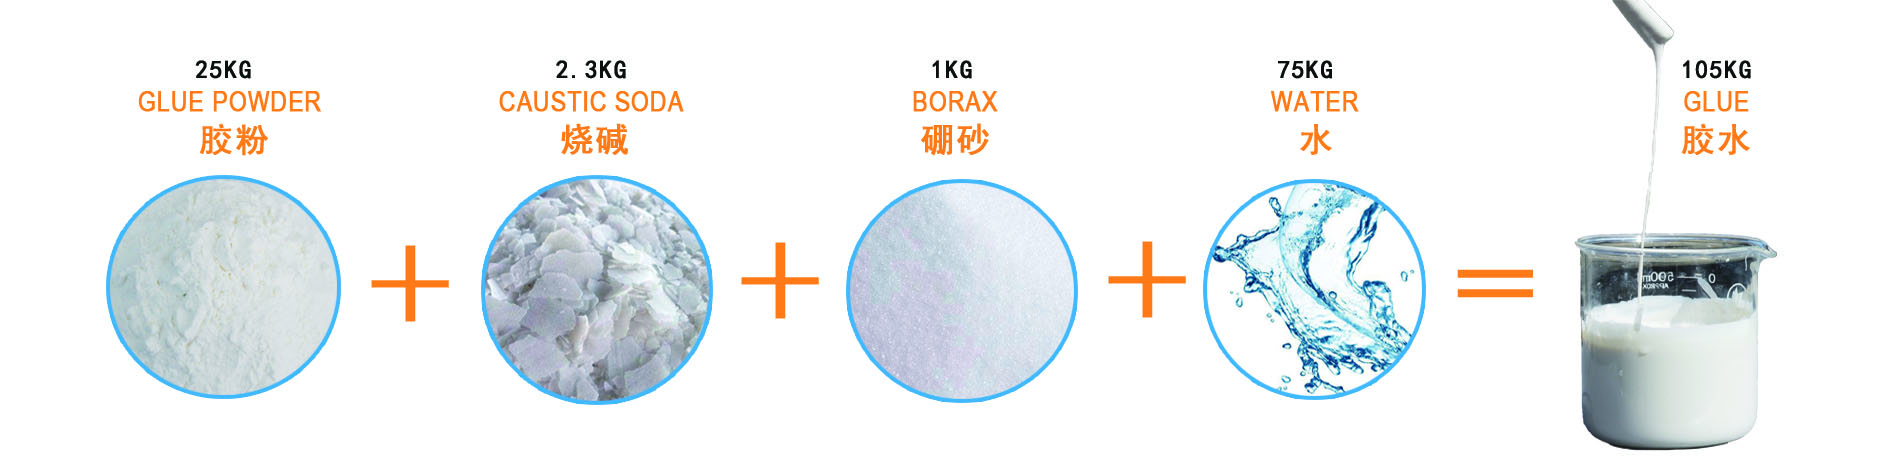 ratio of rubber powder to water